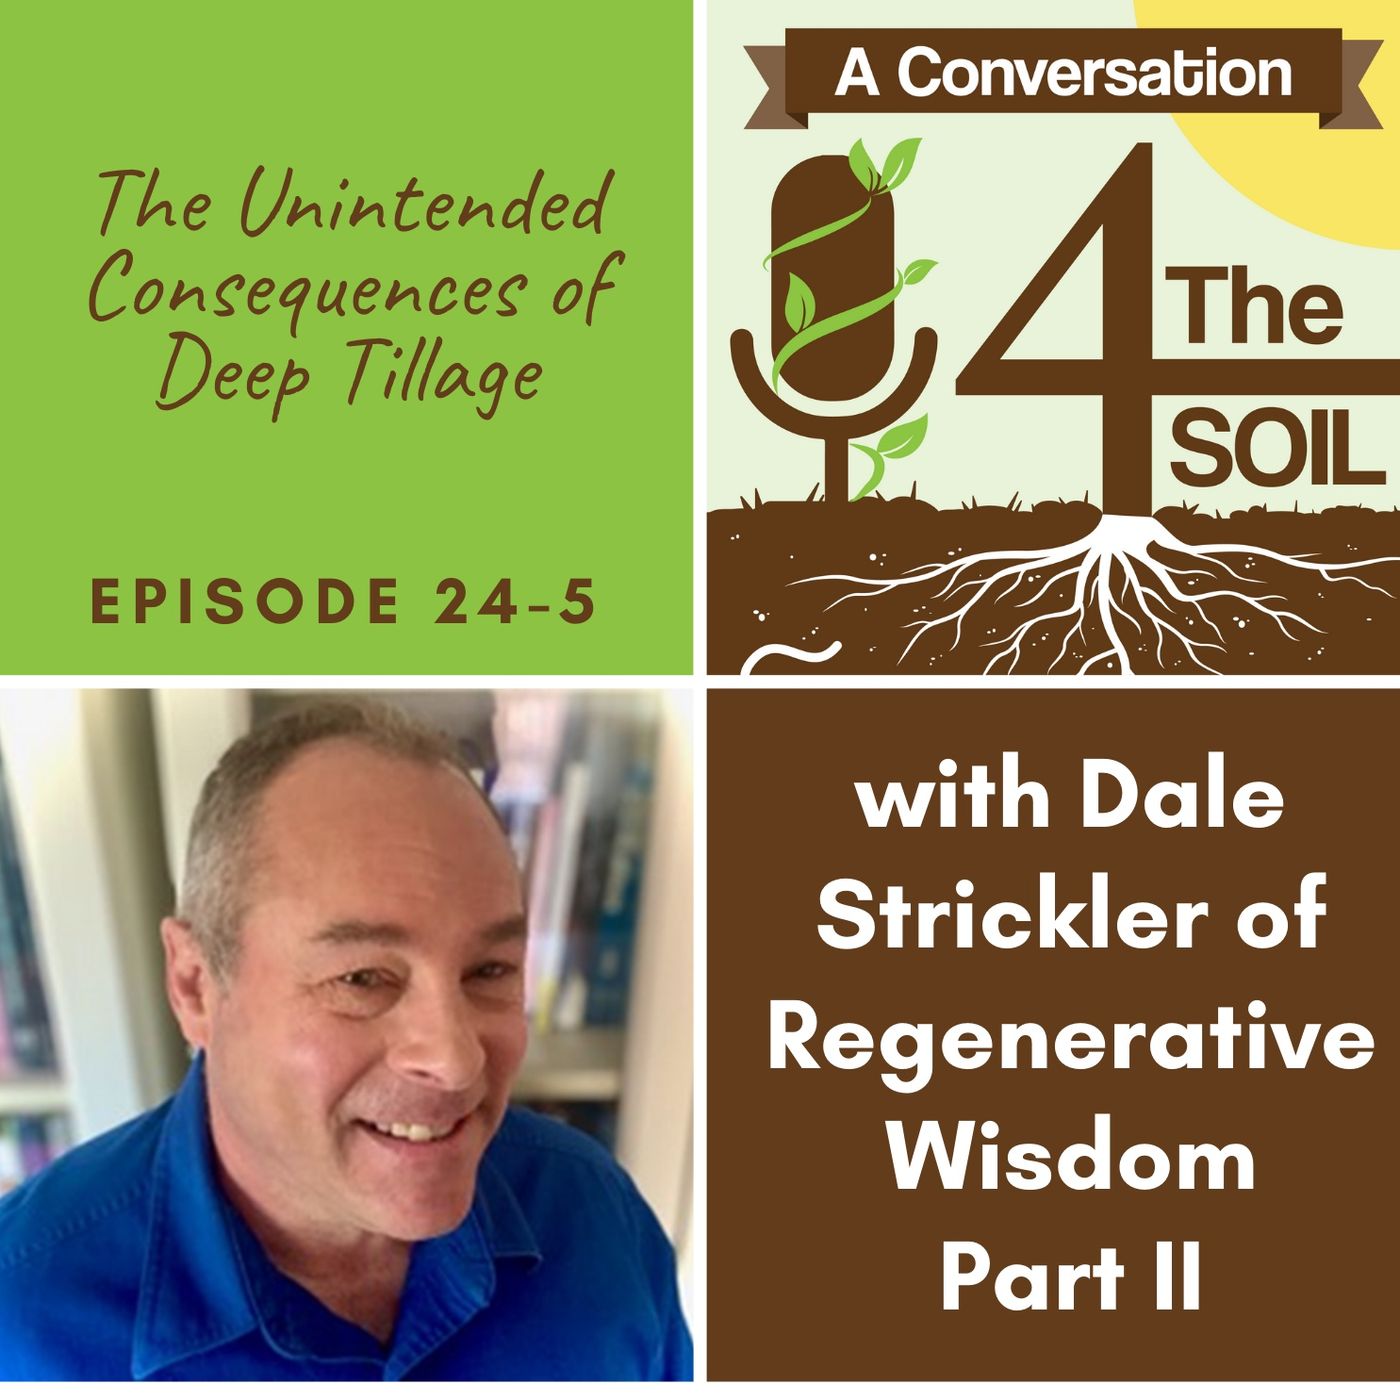 Episode 24 - 5: The Unintended Consequences of Deep Tillage with Dale Strickler of Regenerative Wisdom Part II